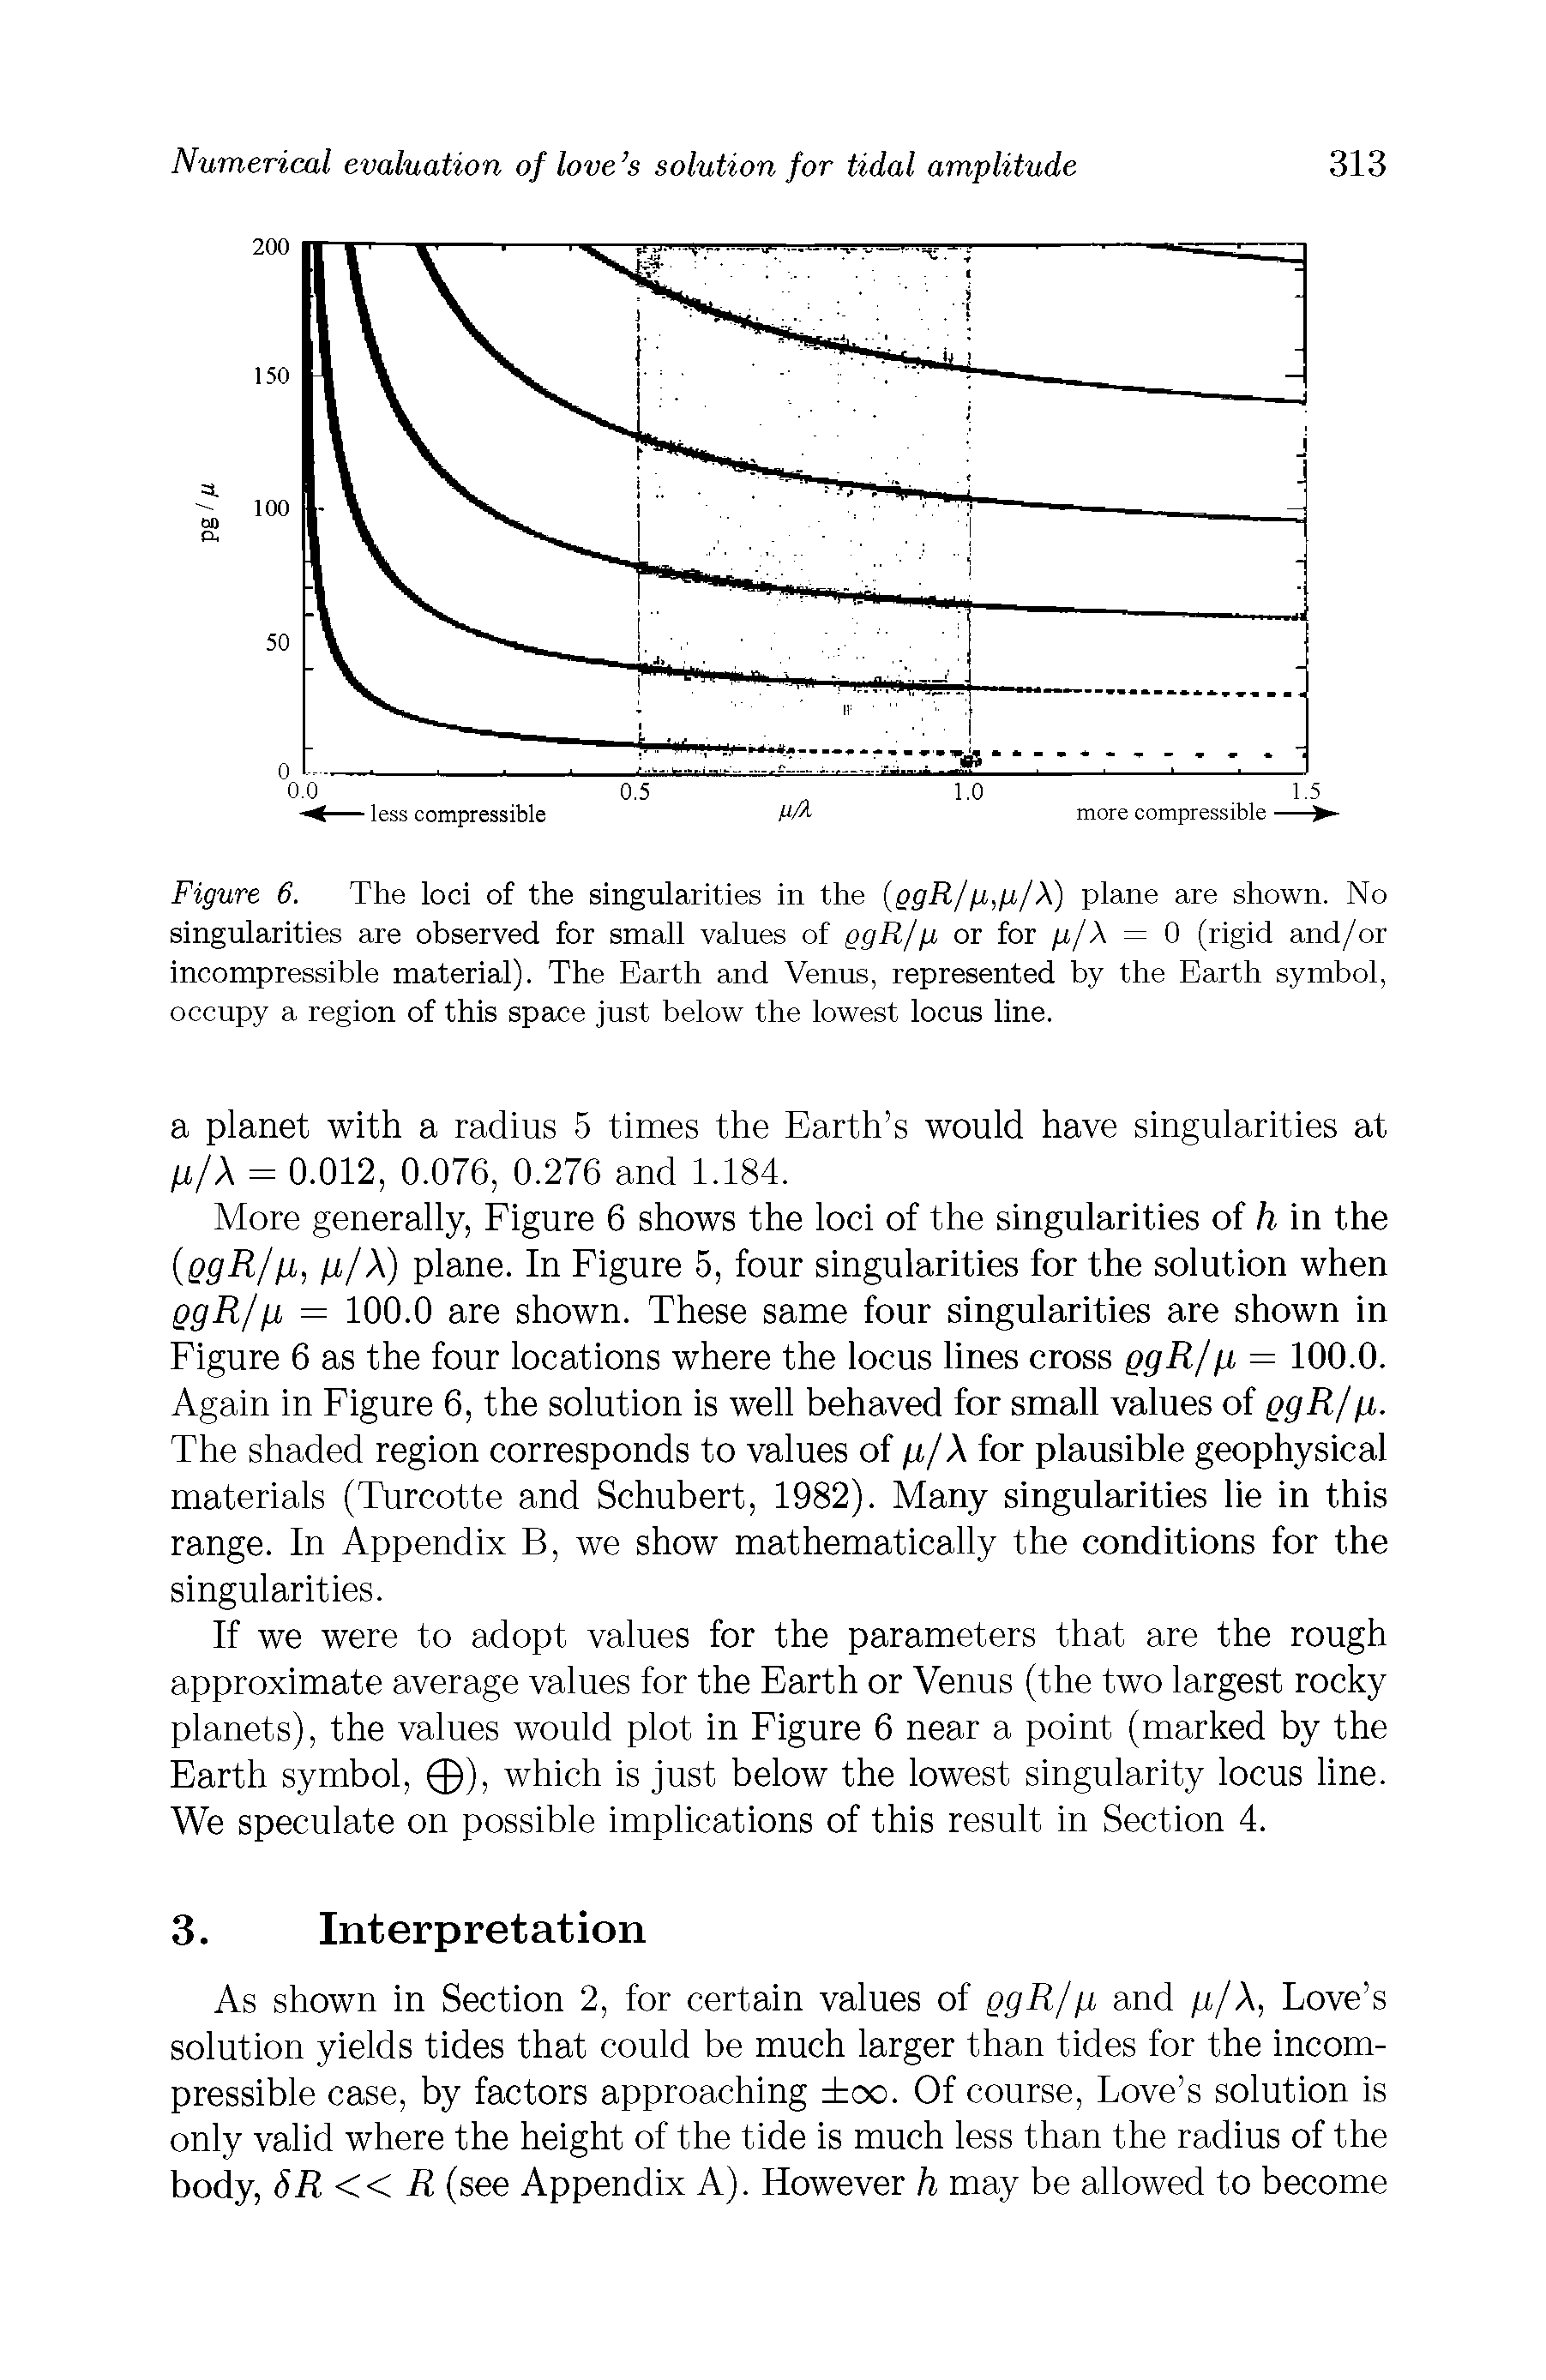 Figure 6. The loci of the singularities in the (ggR/g,p,/A) plane are shown. No singularities are observed for small values of ggR/g. or for g/A = 0 (rigid and/or incompressible material). The Earth and Venus, represented by the Earth symbol, occupy a region of this space just below the lowest locus line.